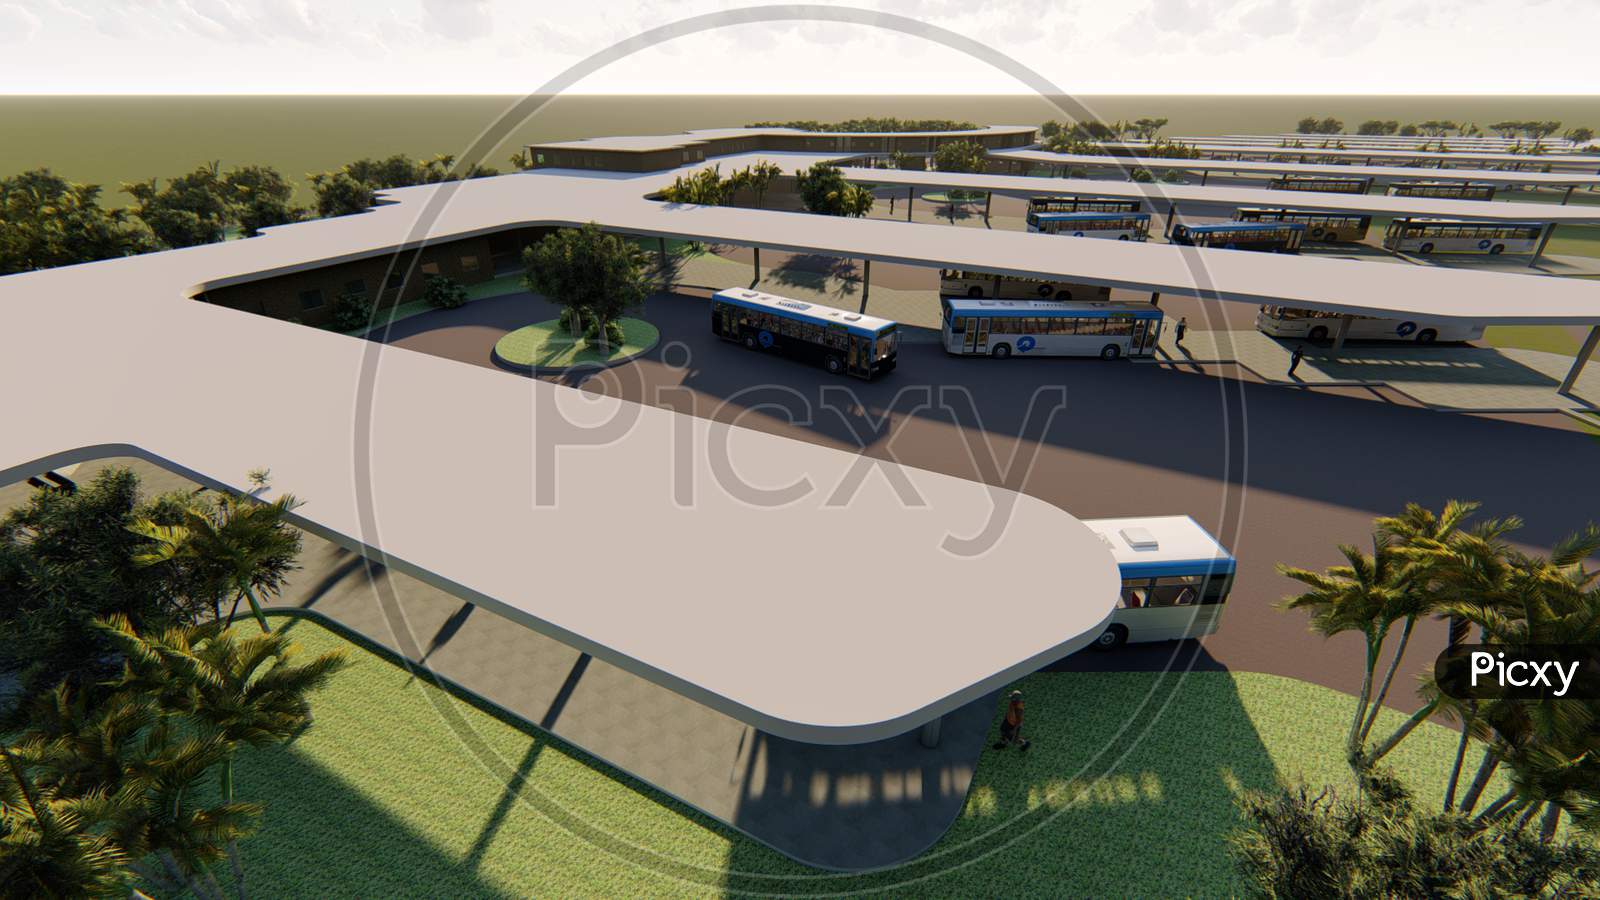 Proposed ISBT Bus terminal